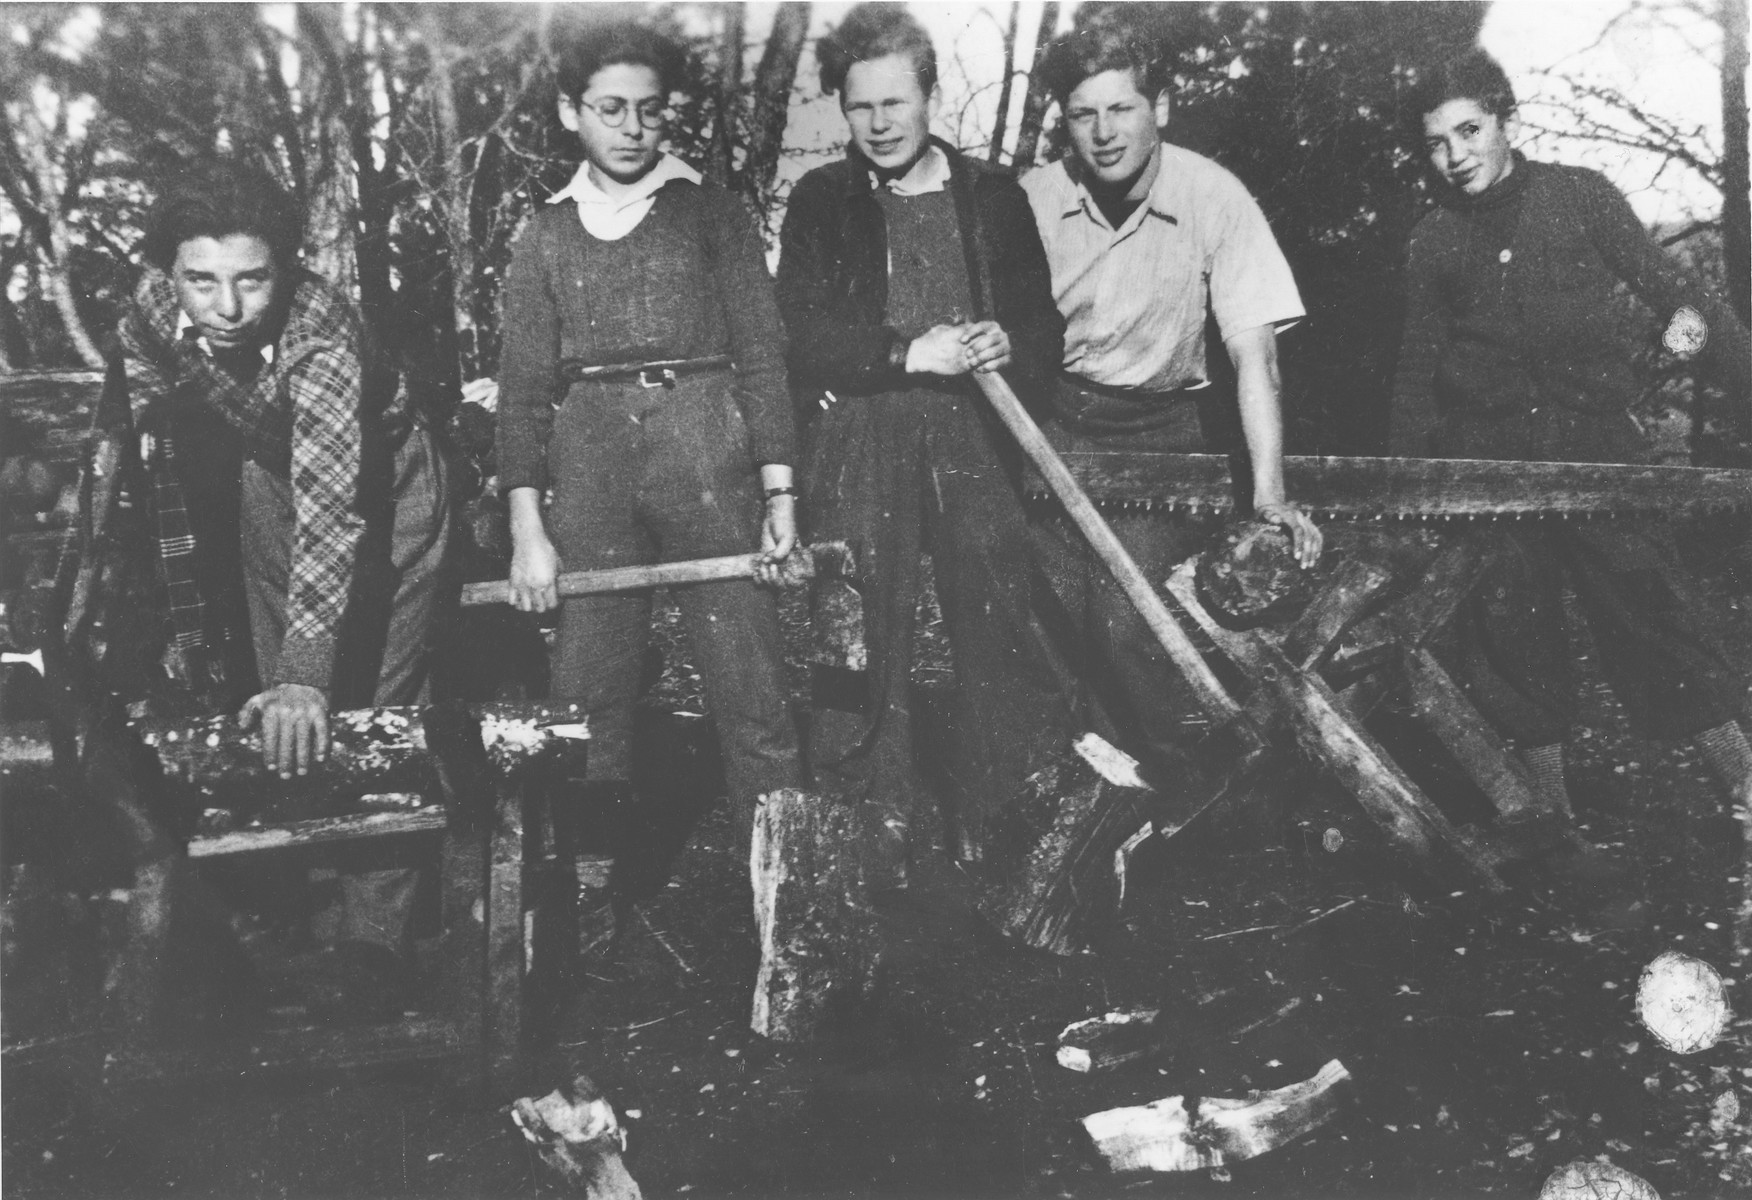 Jewish youth at work chopping wood at the OSE (Oeuvre de Secours aux Enfants) children's home in Masgelier.  

From left to right are Julien Bluchstein, Theo Brenig, Herbert Karliner and Richard Wolf.